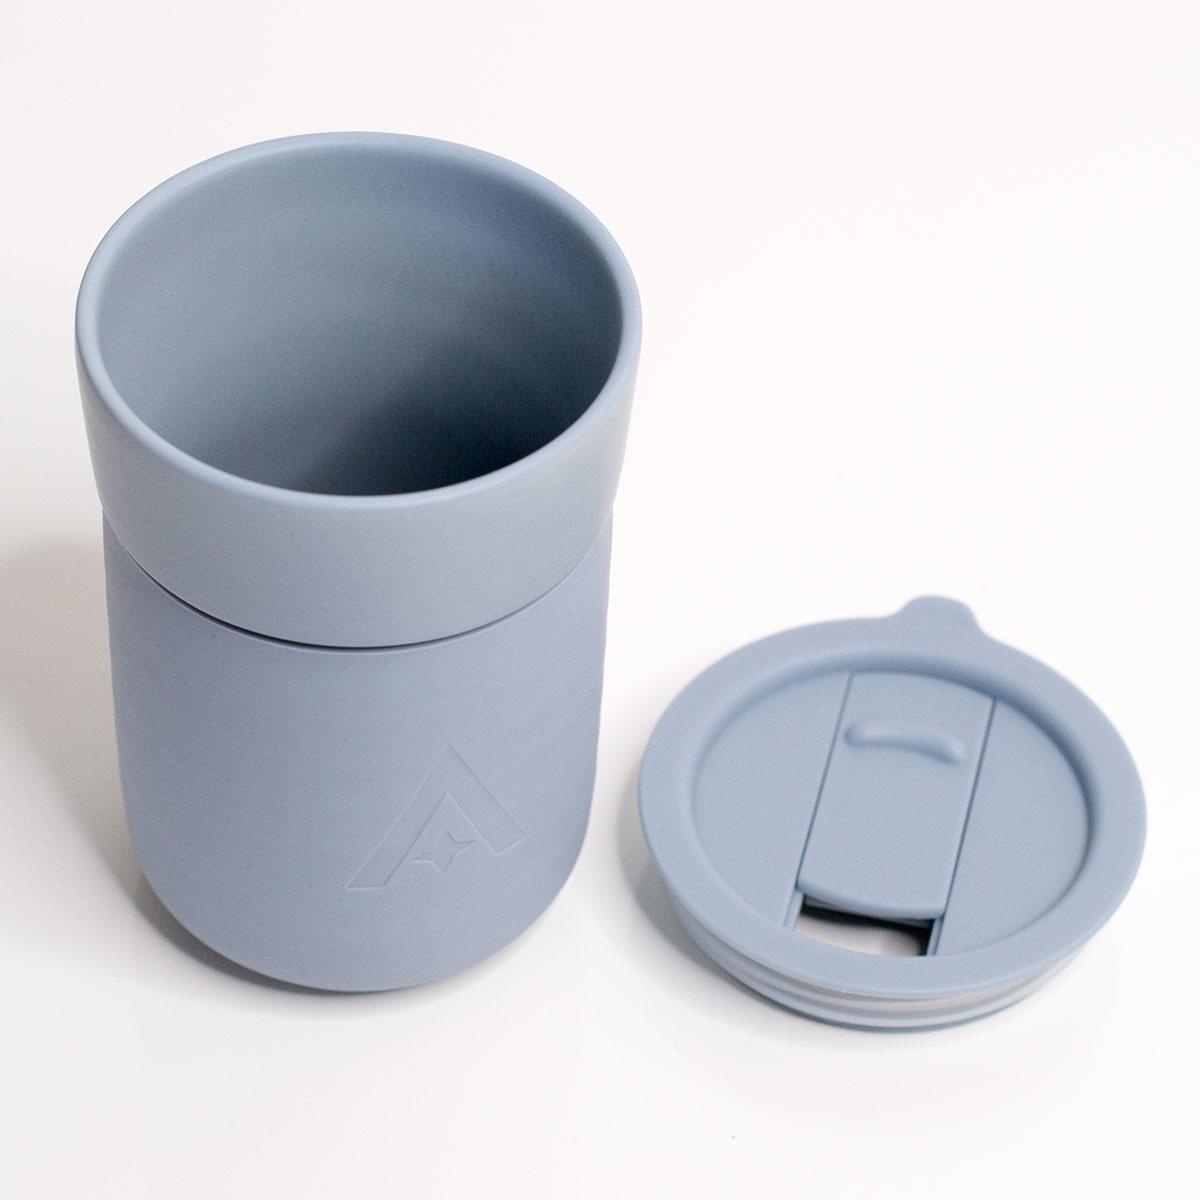 Carry Cup - The Universal Travel Mug by Uberstar (Cool Blue)